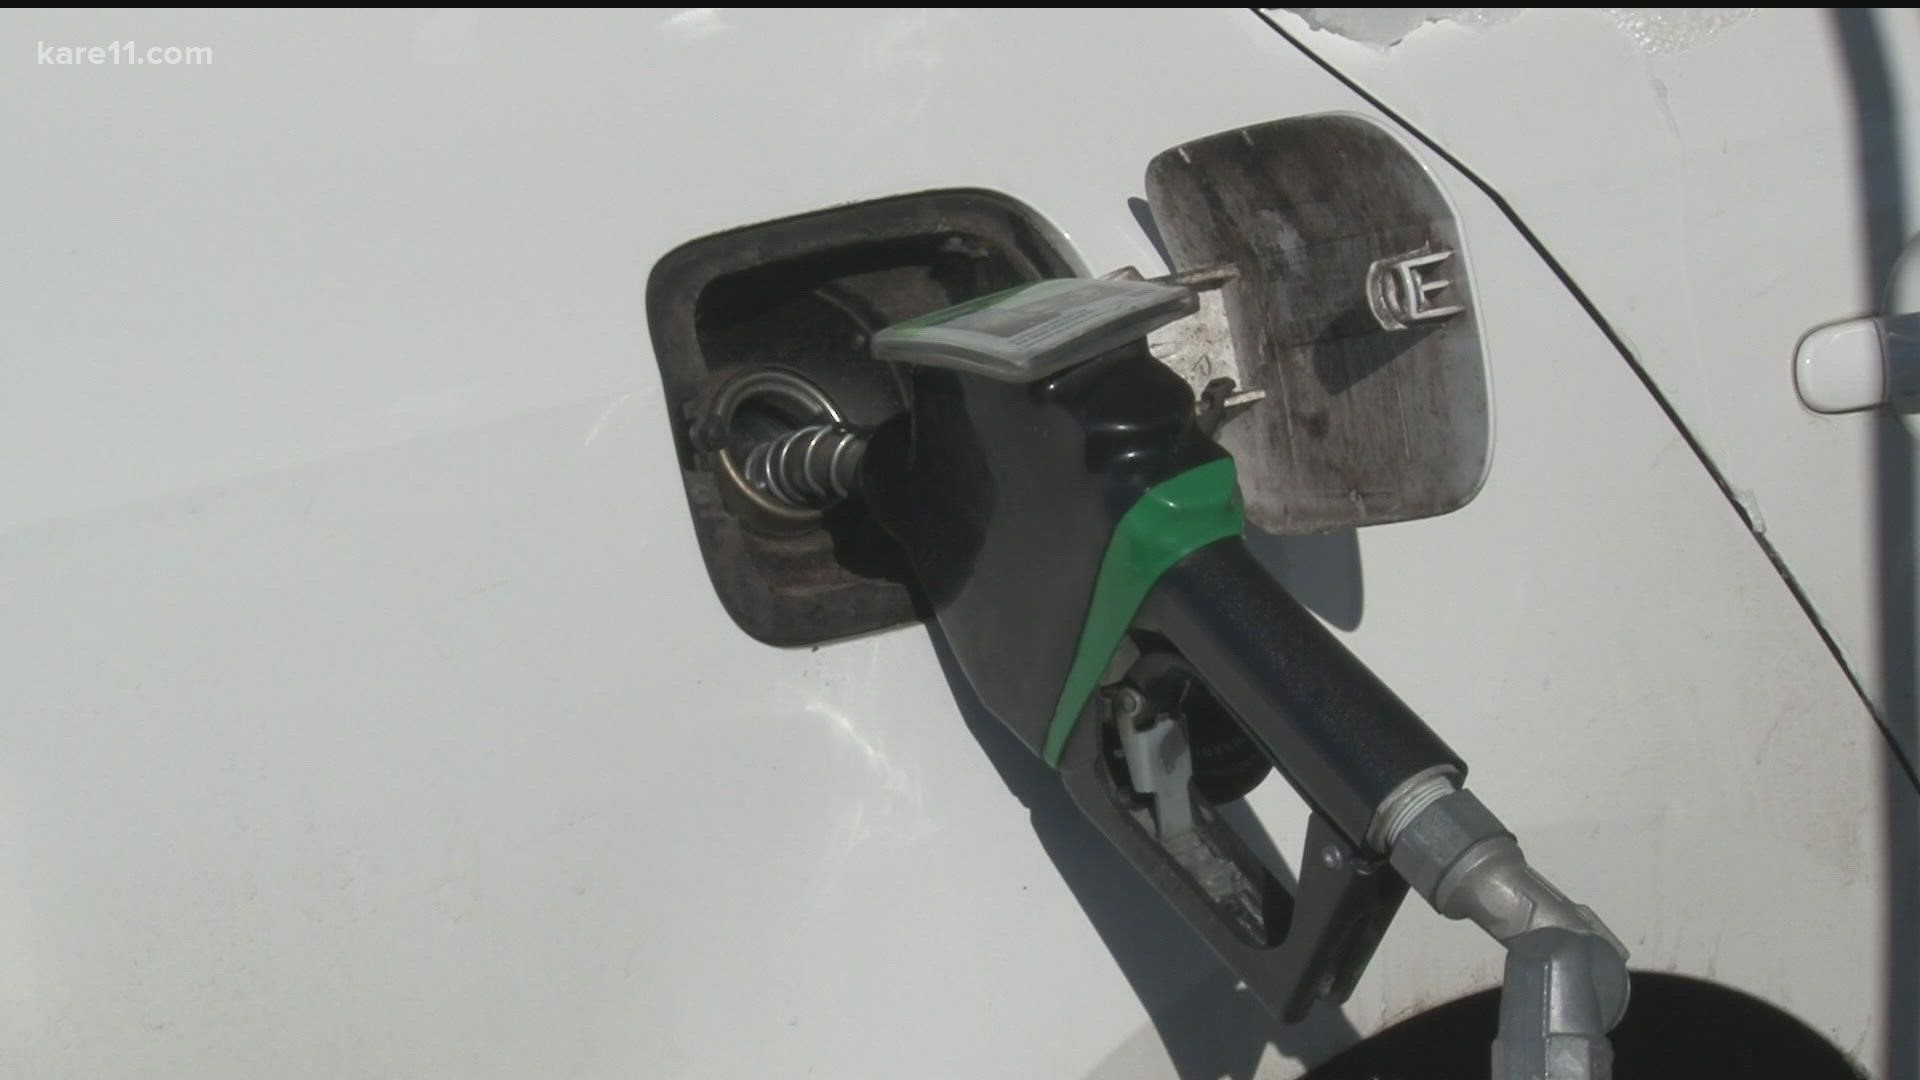 Supporters hope the proposal will help soften the blow of inflation at the gas pumps.